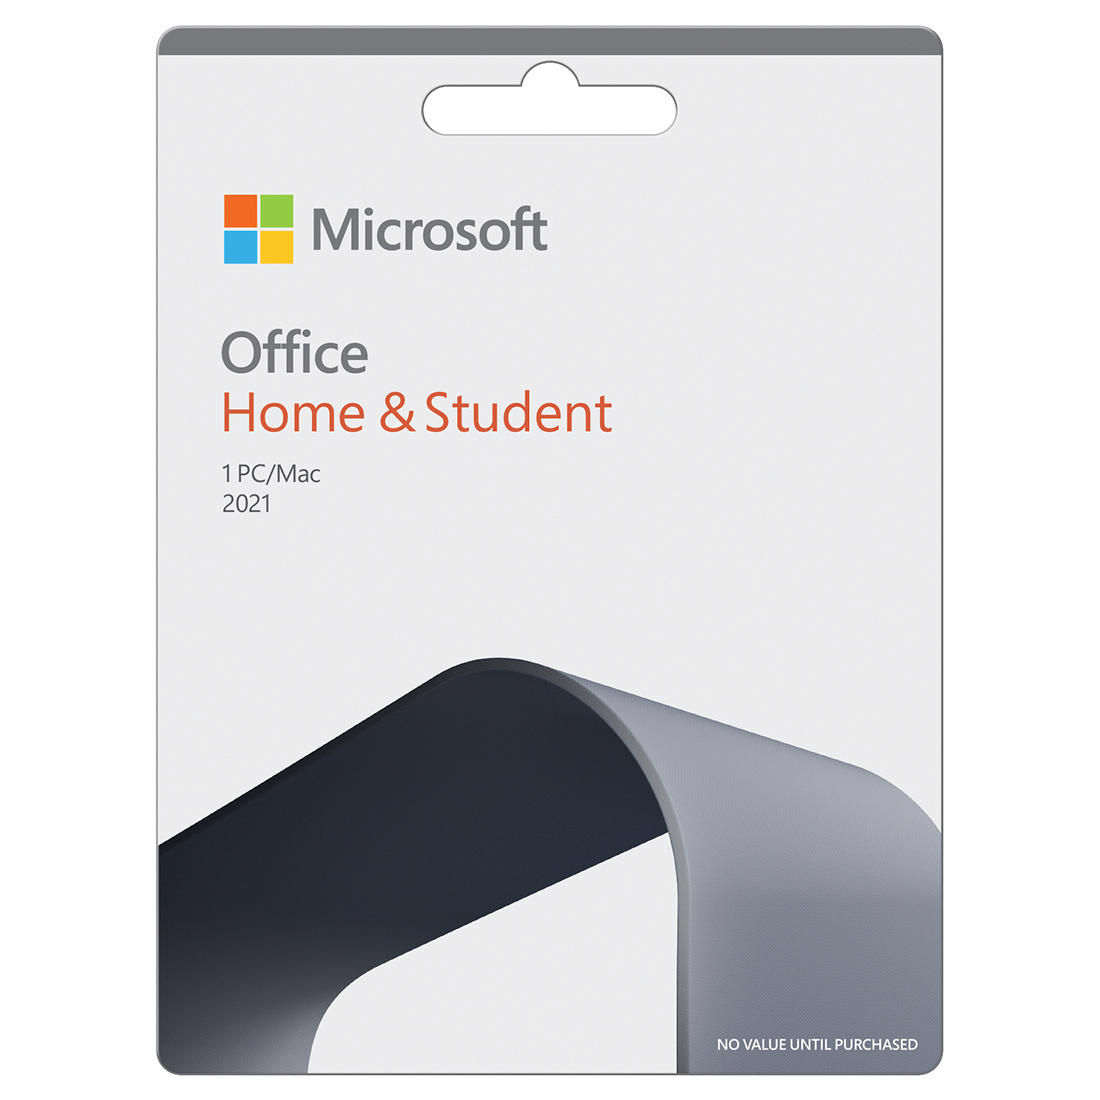 BJs Wholesale: 26.2% discount on Microsoft Home and Student